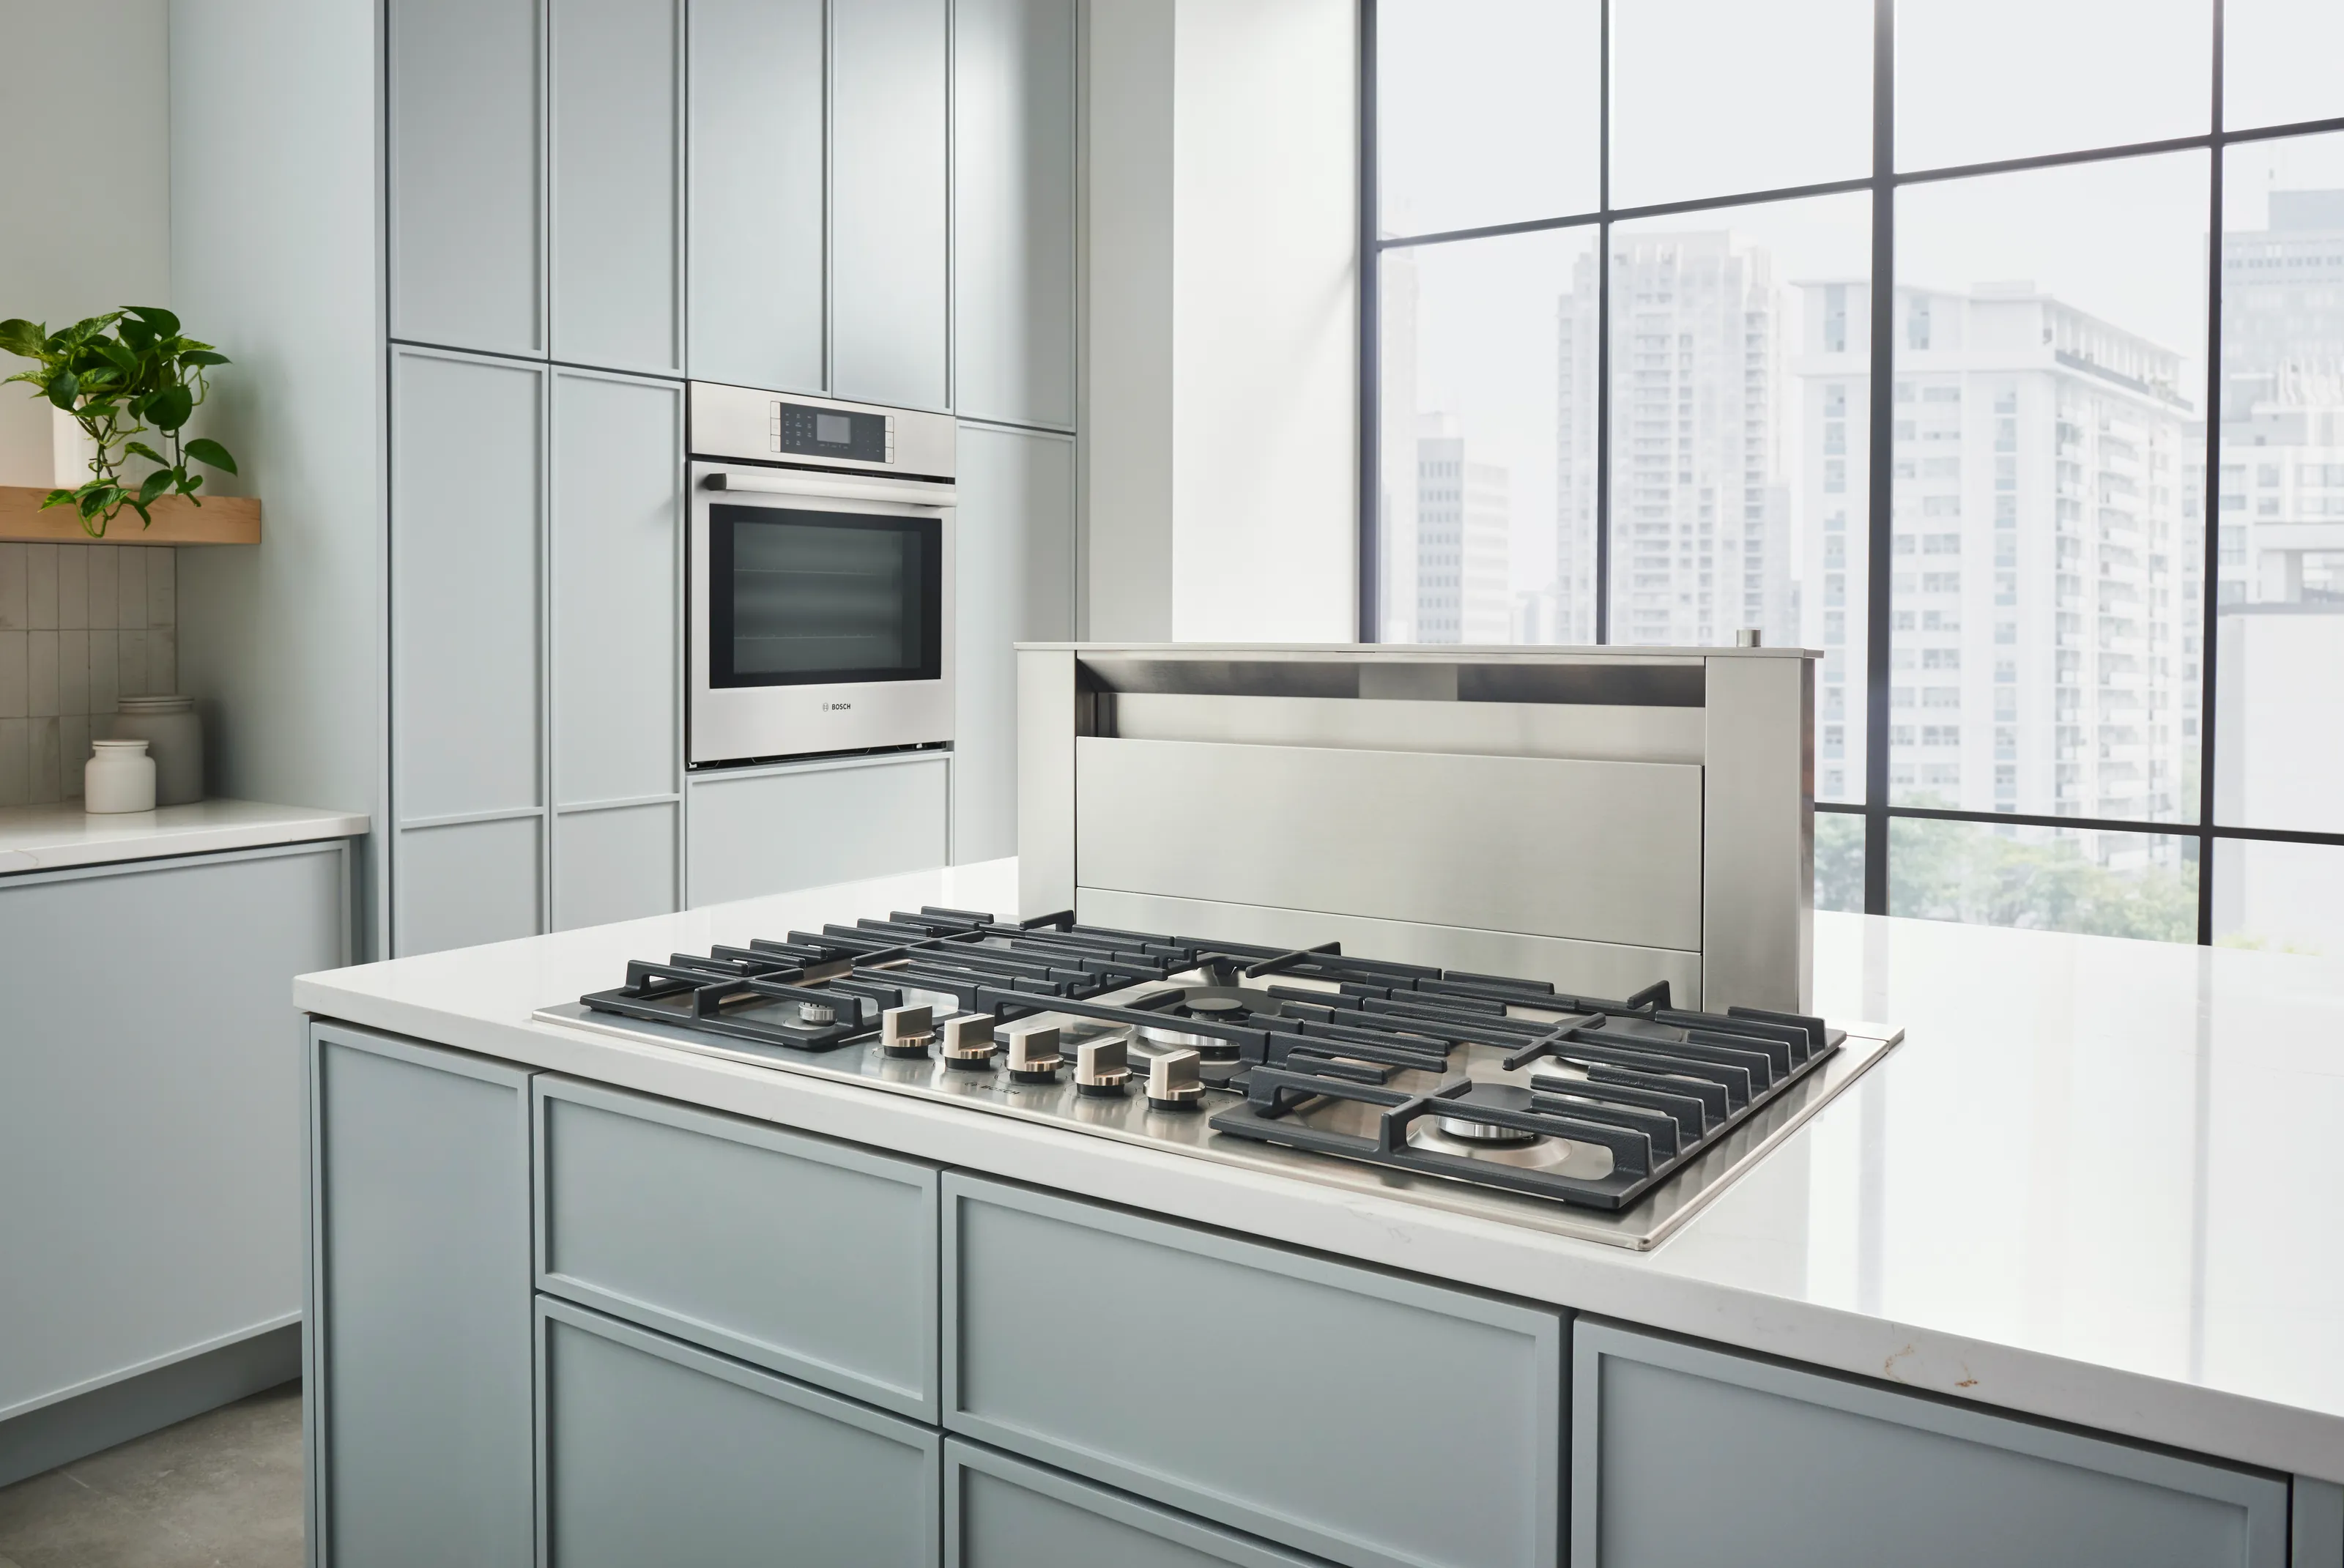 Bosch Cooking and Baking Appliance Repair